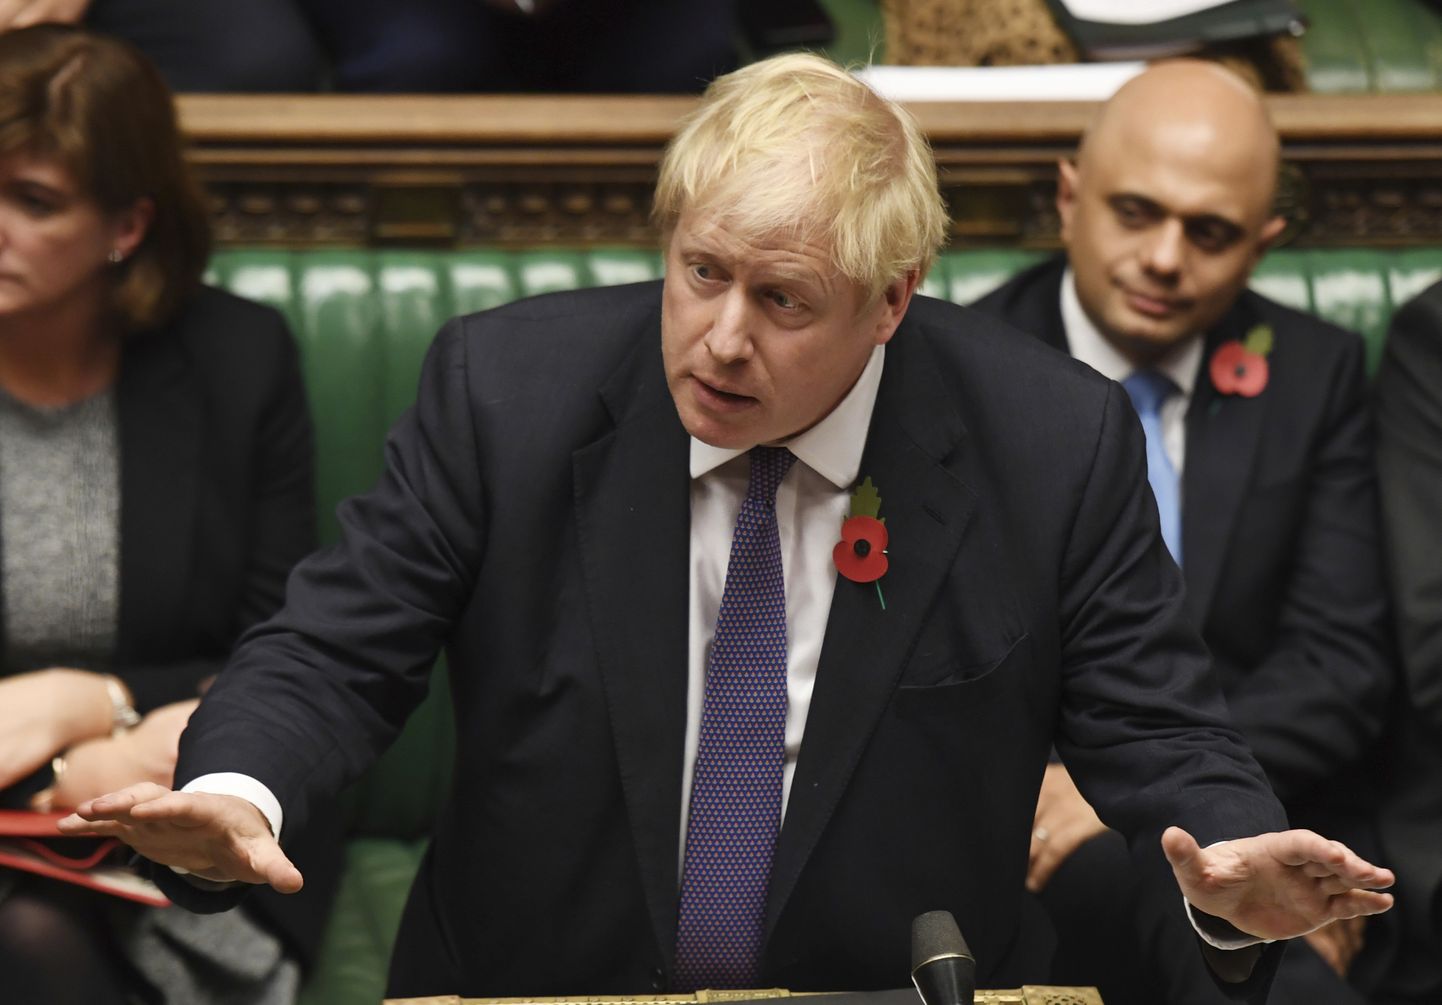 Britain's Prime Minister Boris Johnson speaks to lawmakers during the election debate in the House of Commons, London, Monday Oct. 28, 2019.   Lawmakers on Monday rejected Johnson's call for a December national election, in the hope of breaking the political deadlock over Brexit. (Jessica Taylor/House of Commons via AP)